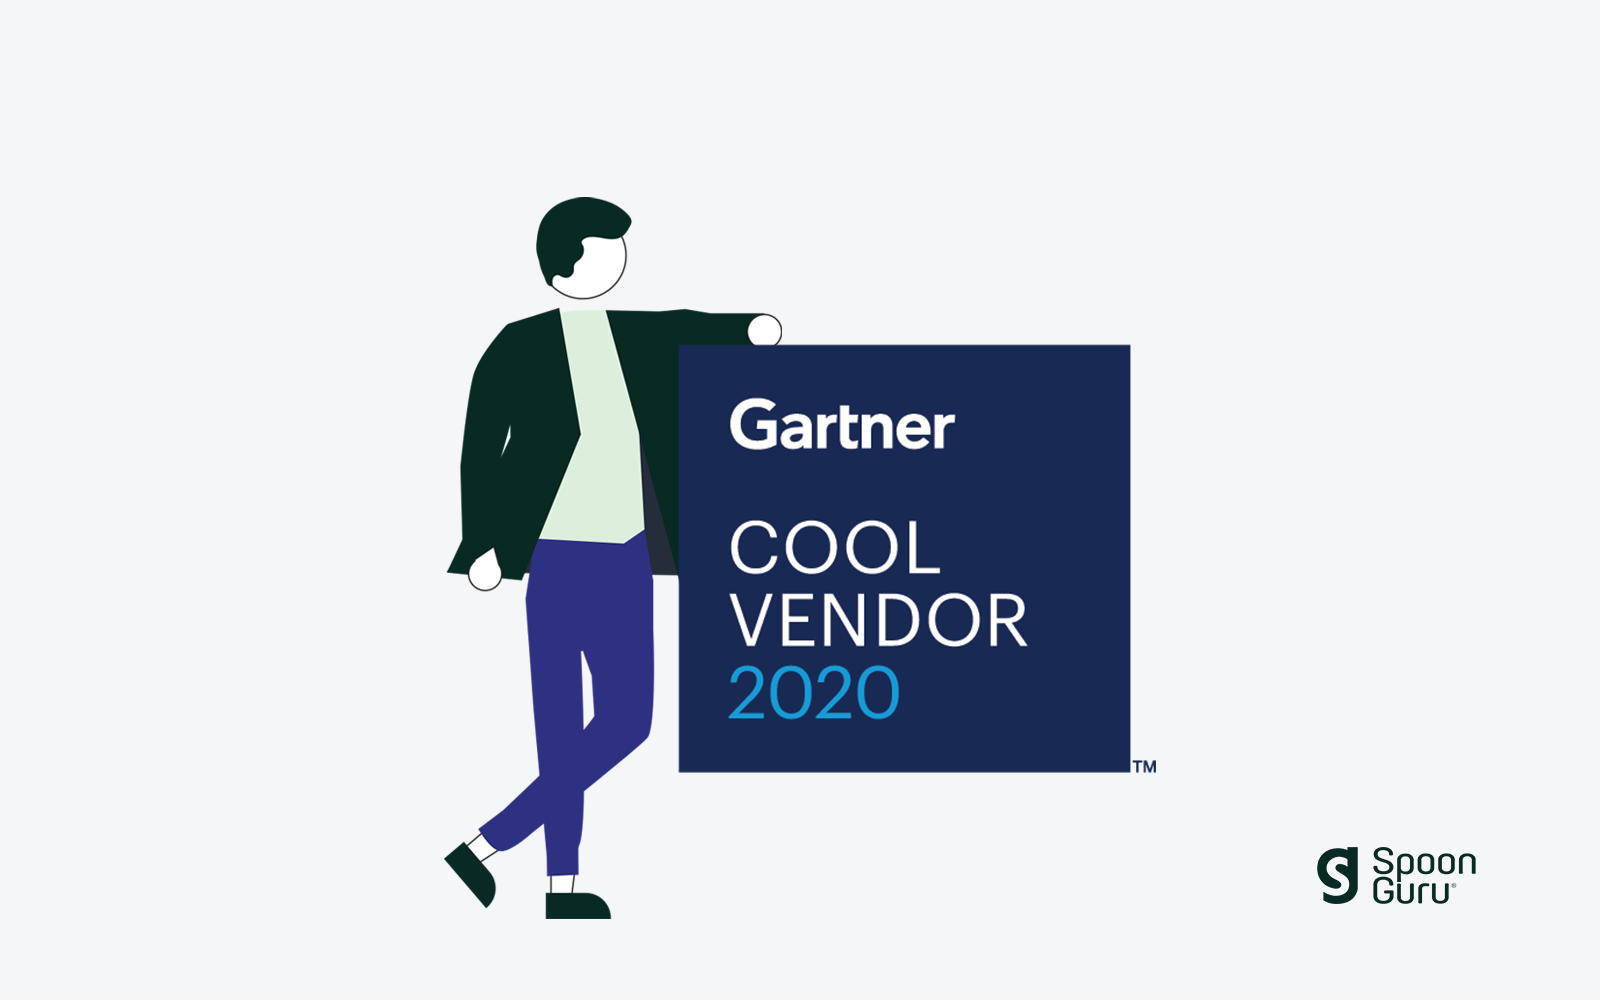 We are proud to be named by Gartner as a ‘Cool Vendor’